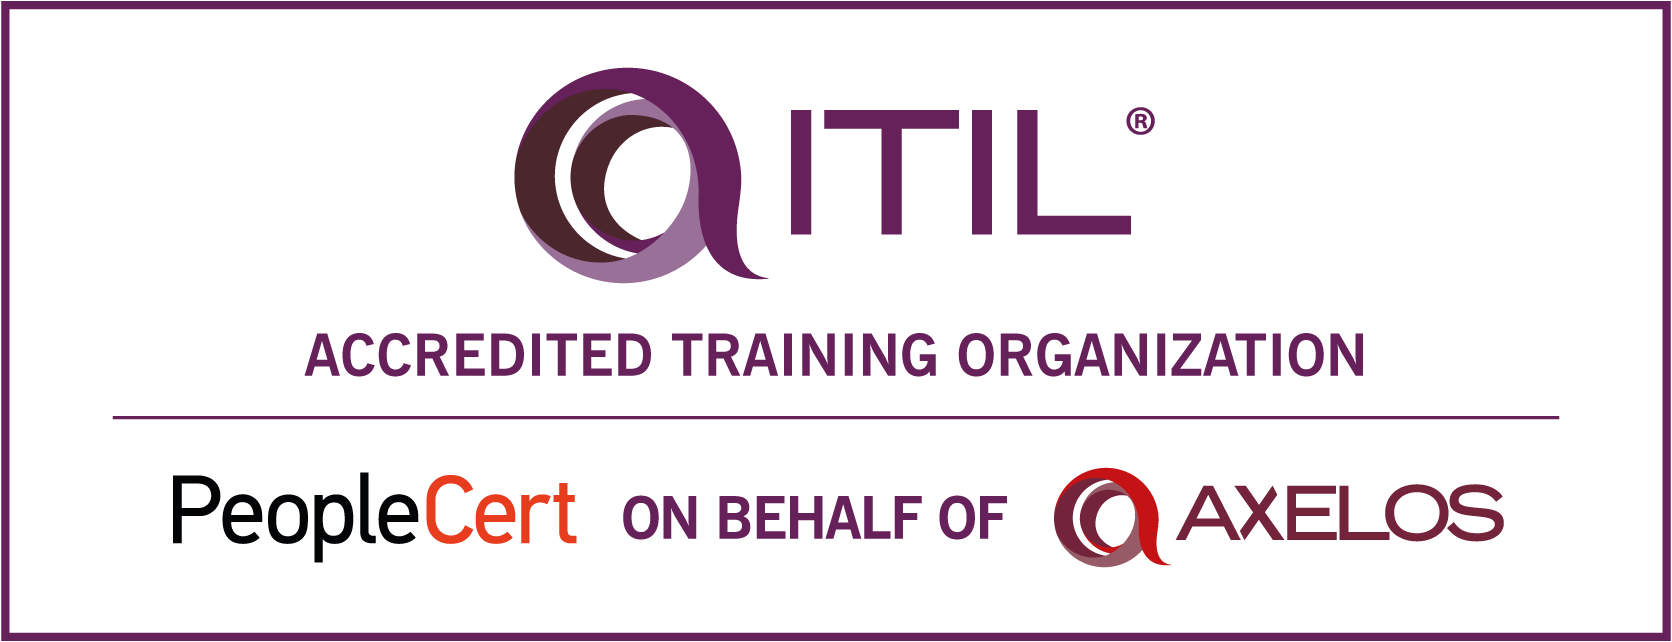 ITIL® and The Swirl logo™ are trade marks of AXELOS Limited, used under permission of AXELOS Limited. All rights reserved.